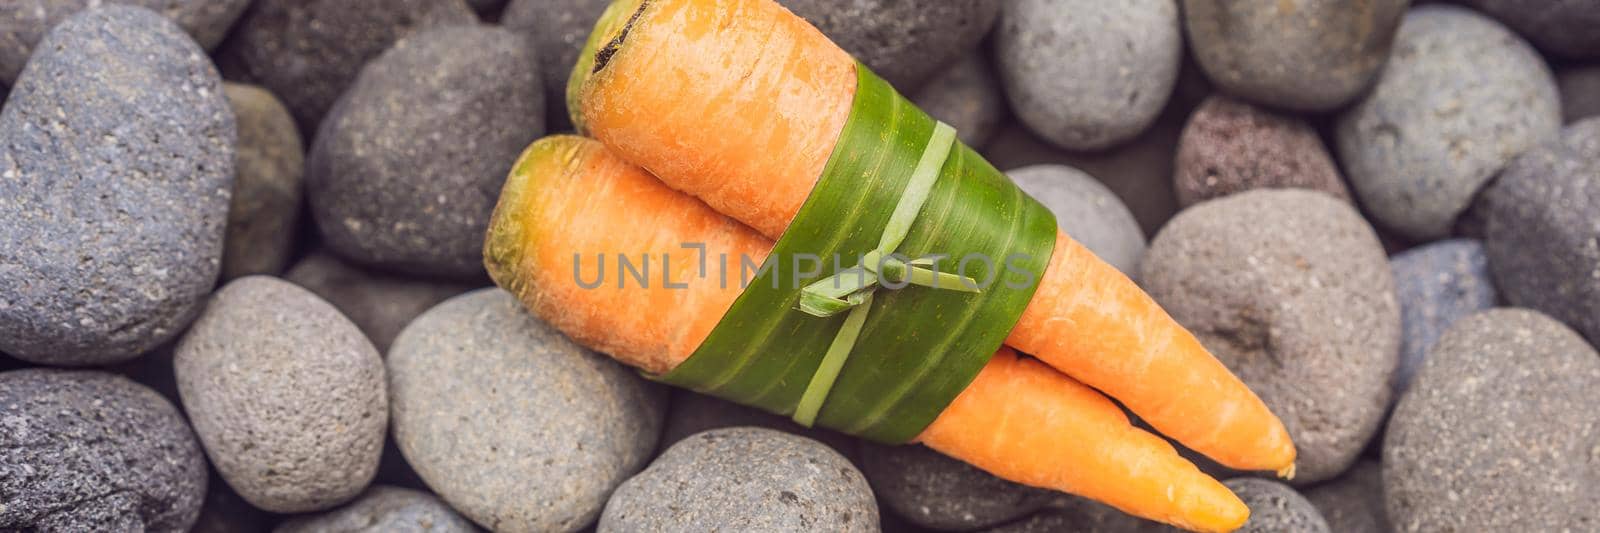 Eco-friendly product packaging concept. Carrot wrapped in a banana leaf, as an alternative to a plastic bag. Zero waste concept. Alternative packaging BANNER, LONG FORMAT by galitskaya